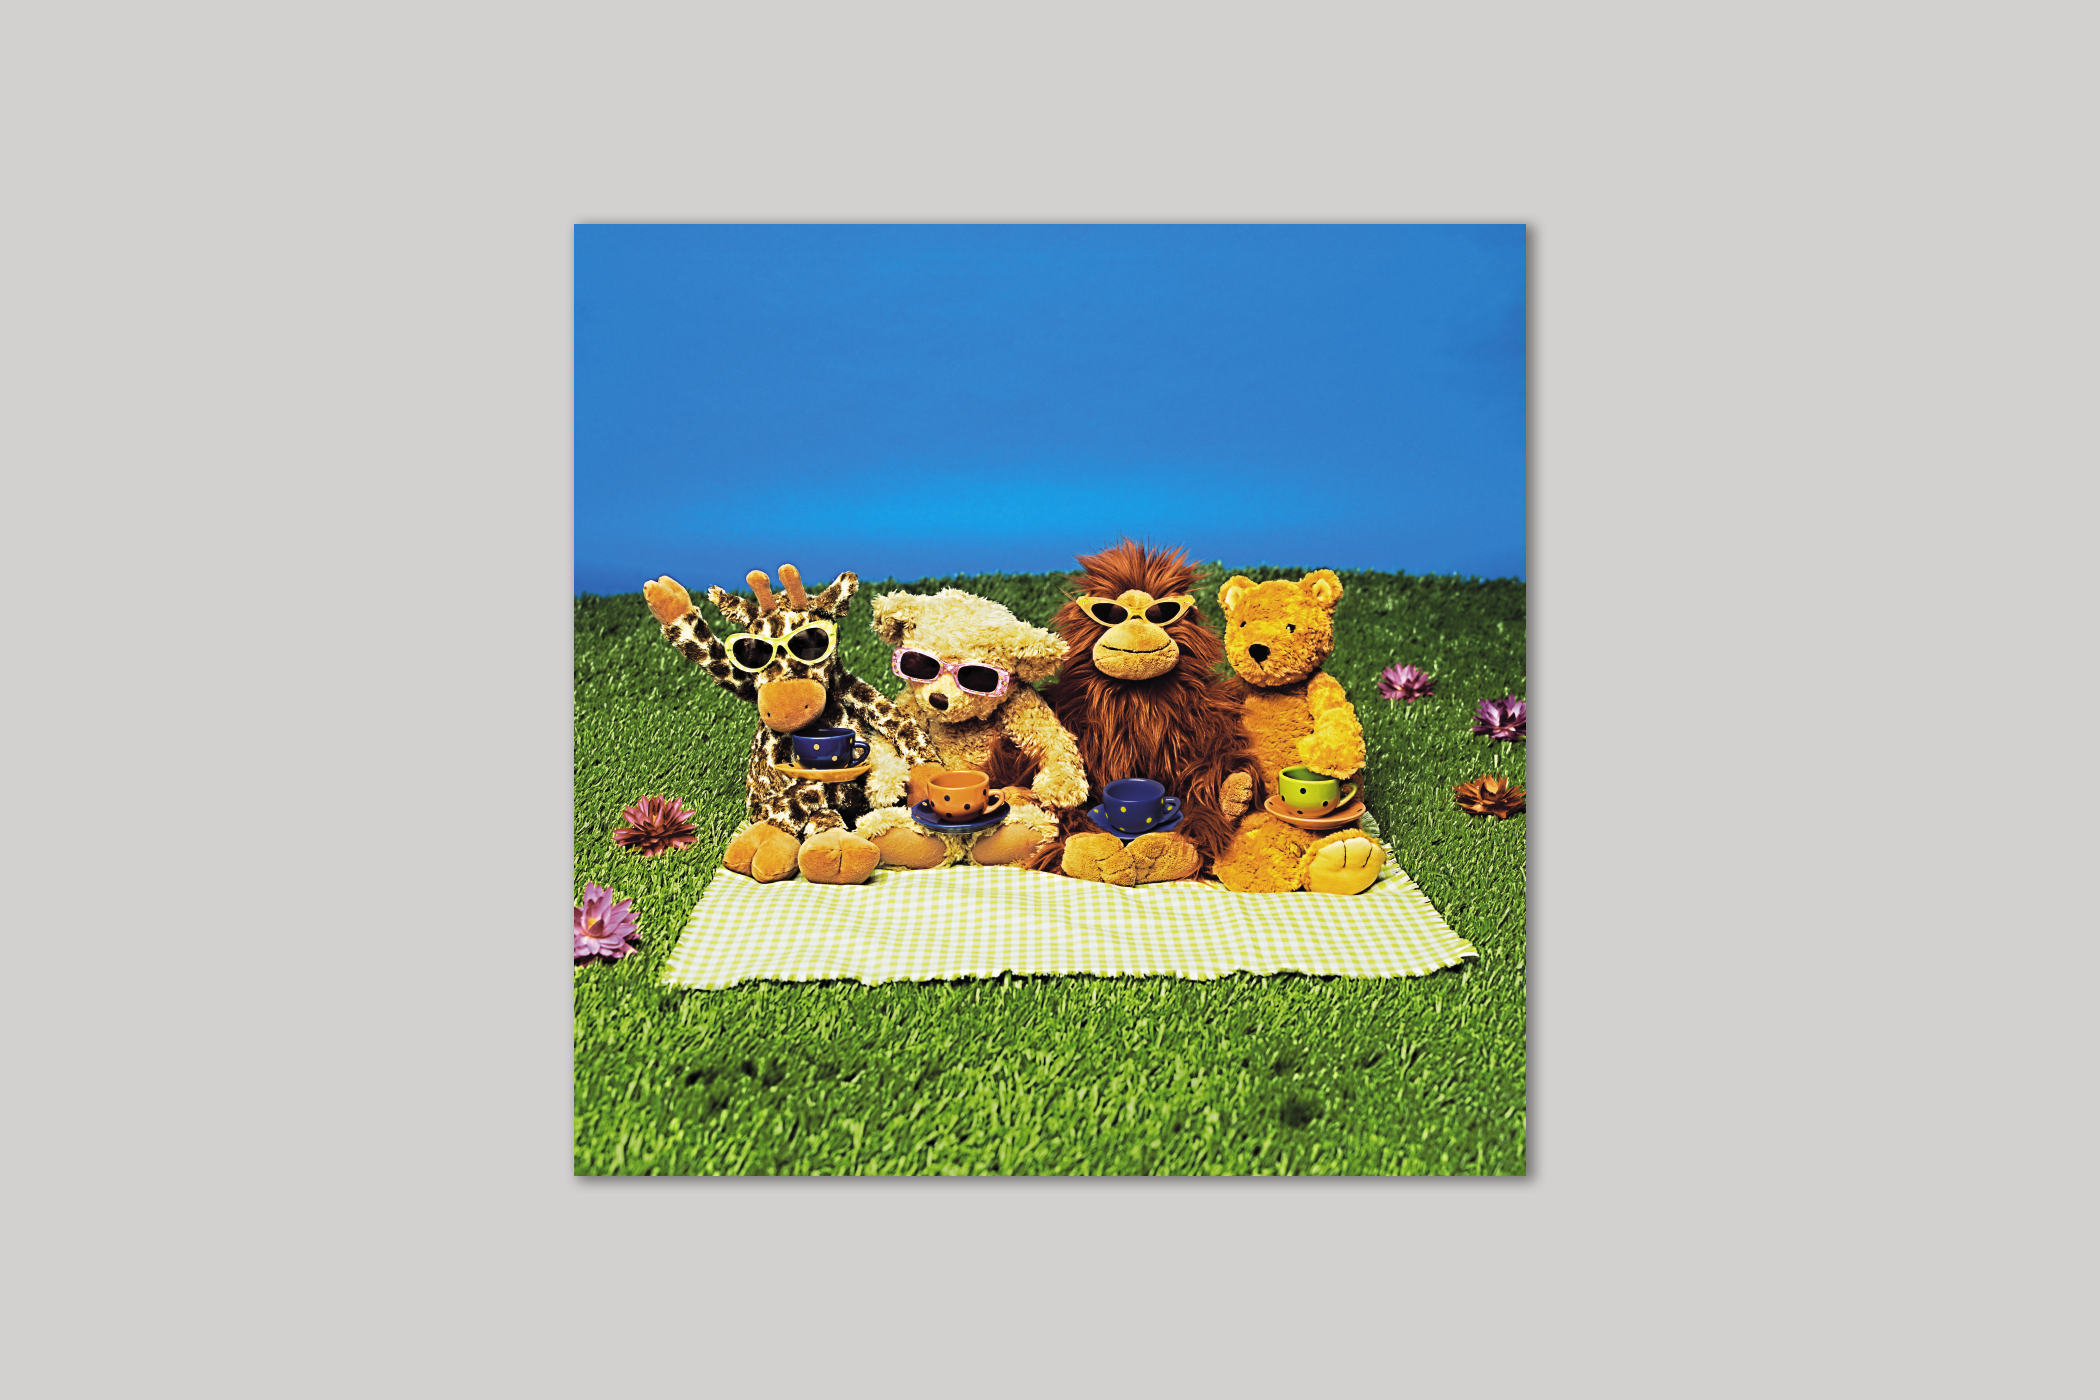 Teddy Bear's Picnic from Exposure range of photographic cards by Icon.